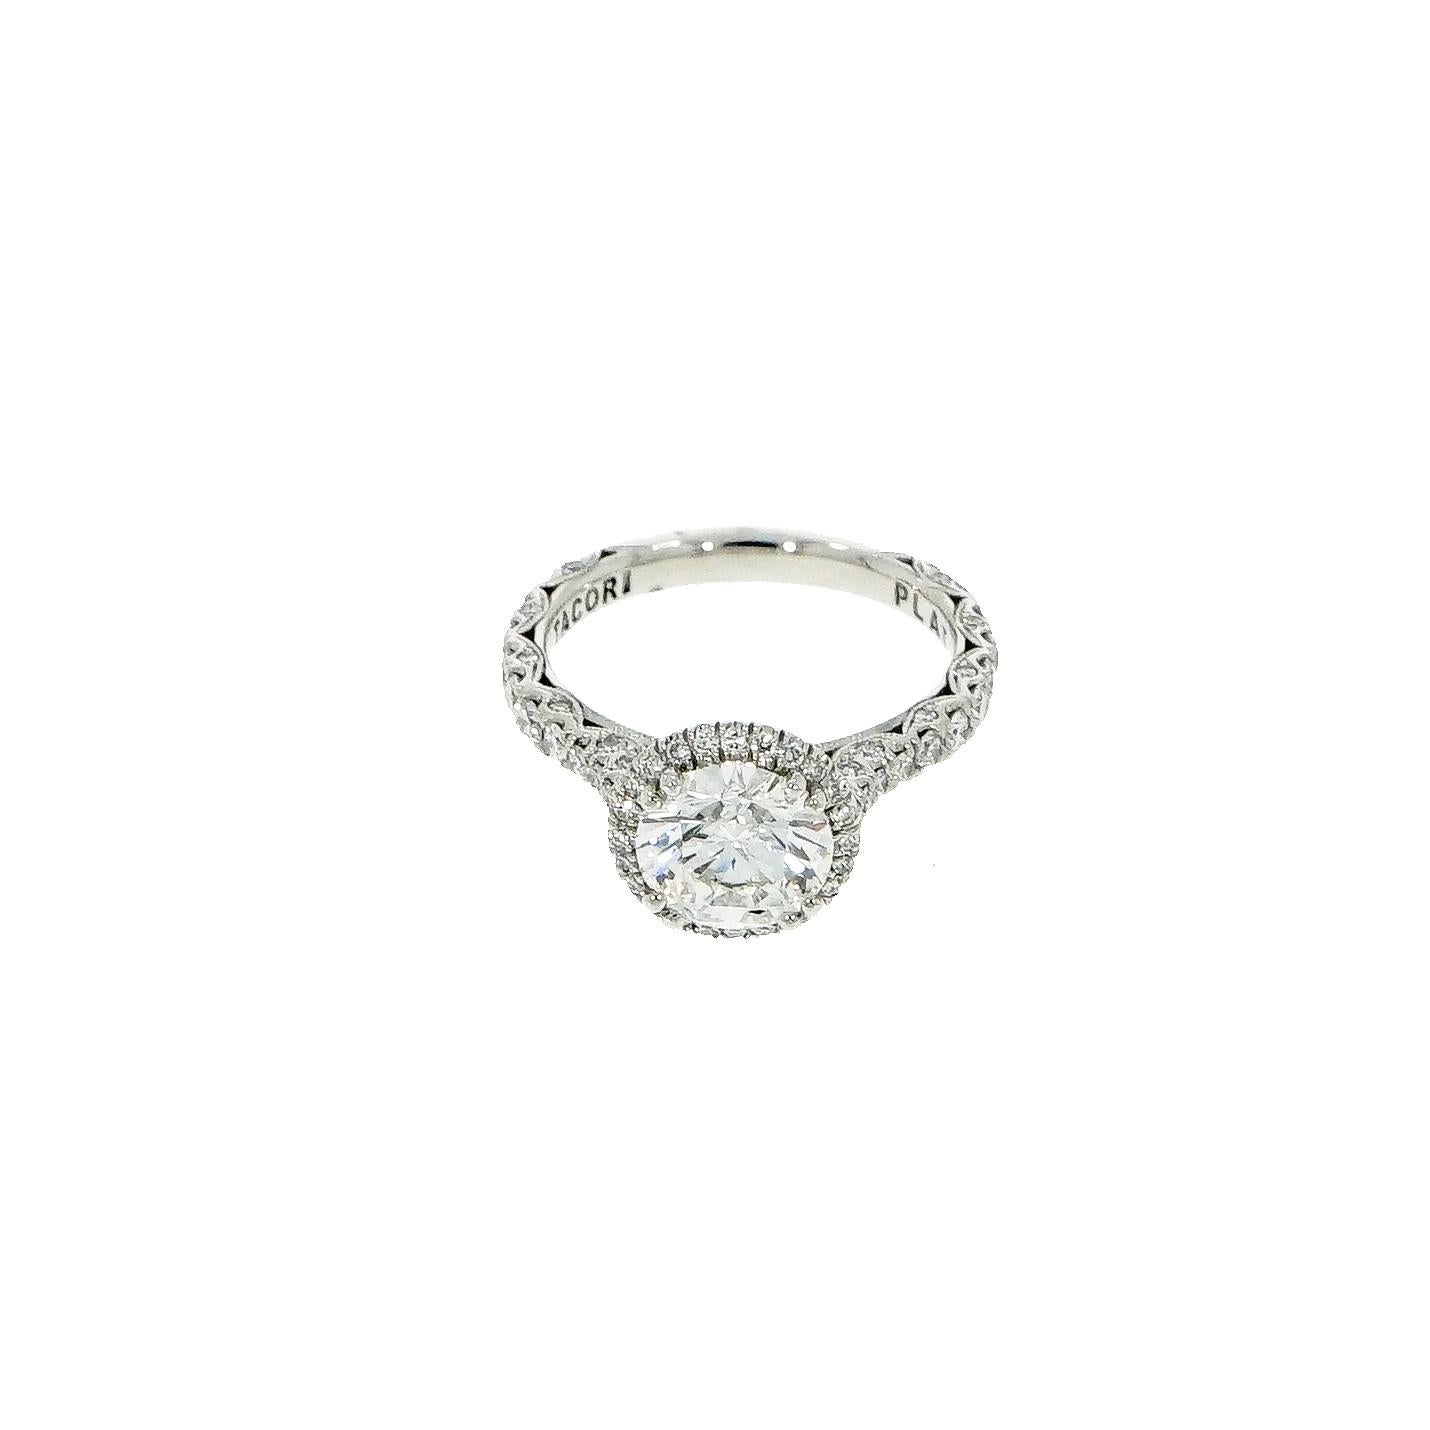 This exquisite Engagement ring features the iconic diamond crescent design, expertly handcrafted  in Platinum by Tacori in California and is custom made just for you  ;)
Exhibit a gorgeous Diamond, GIA Certified Round Brilliant Cut 1.90 carat, D